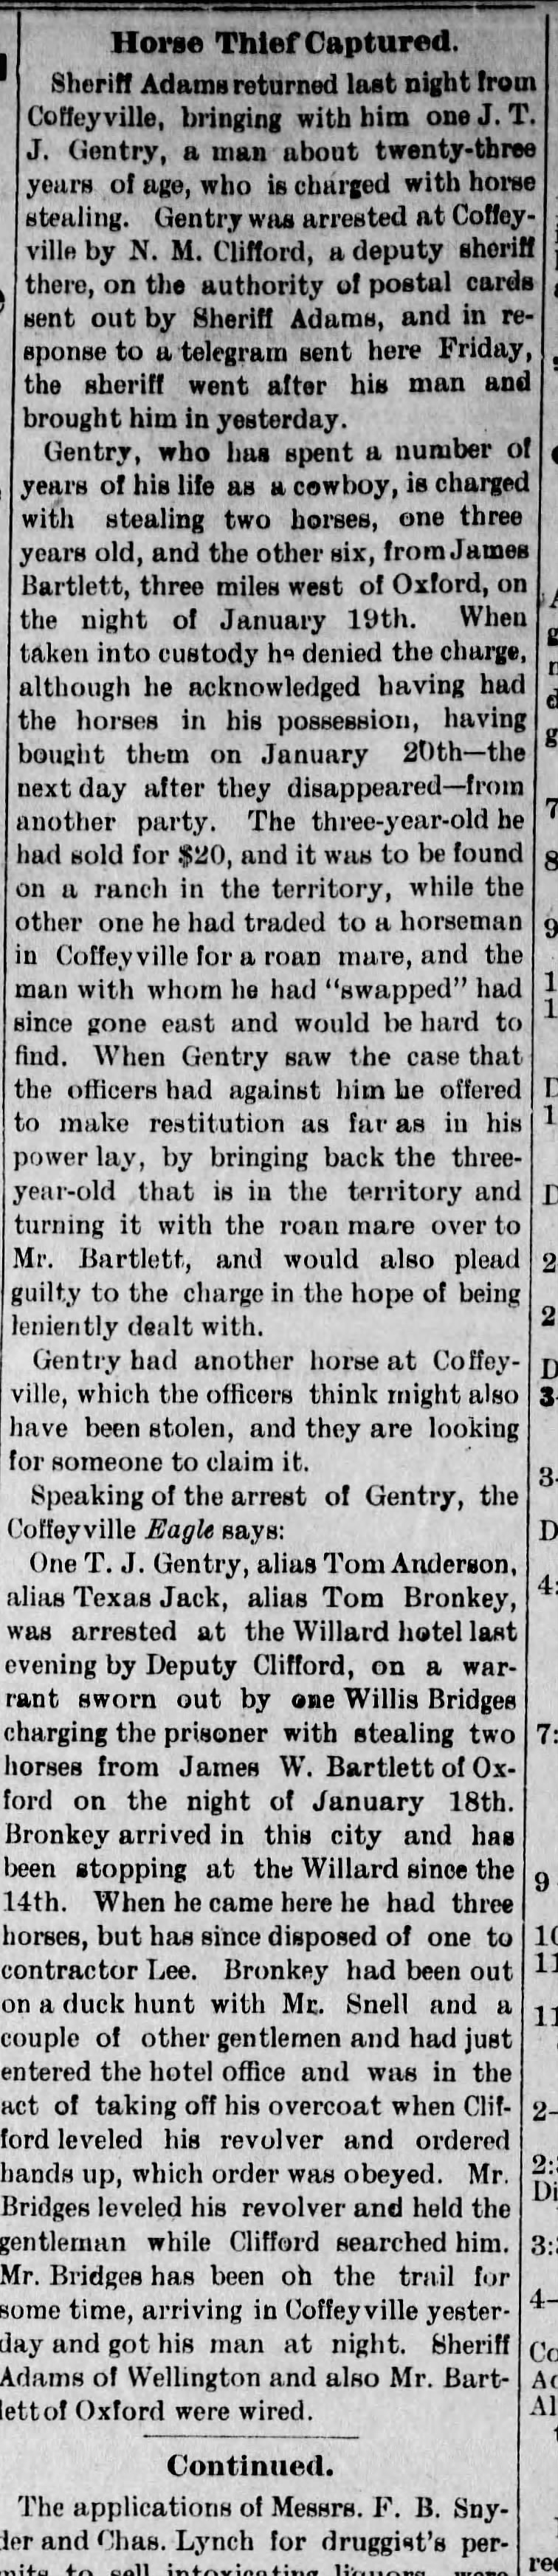 Horse thief who had stole 6 horses from J.W. Bartlett captured